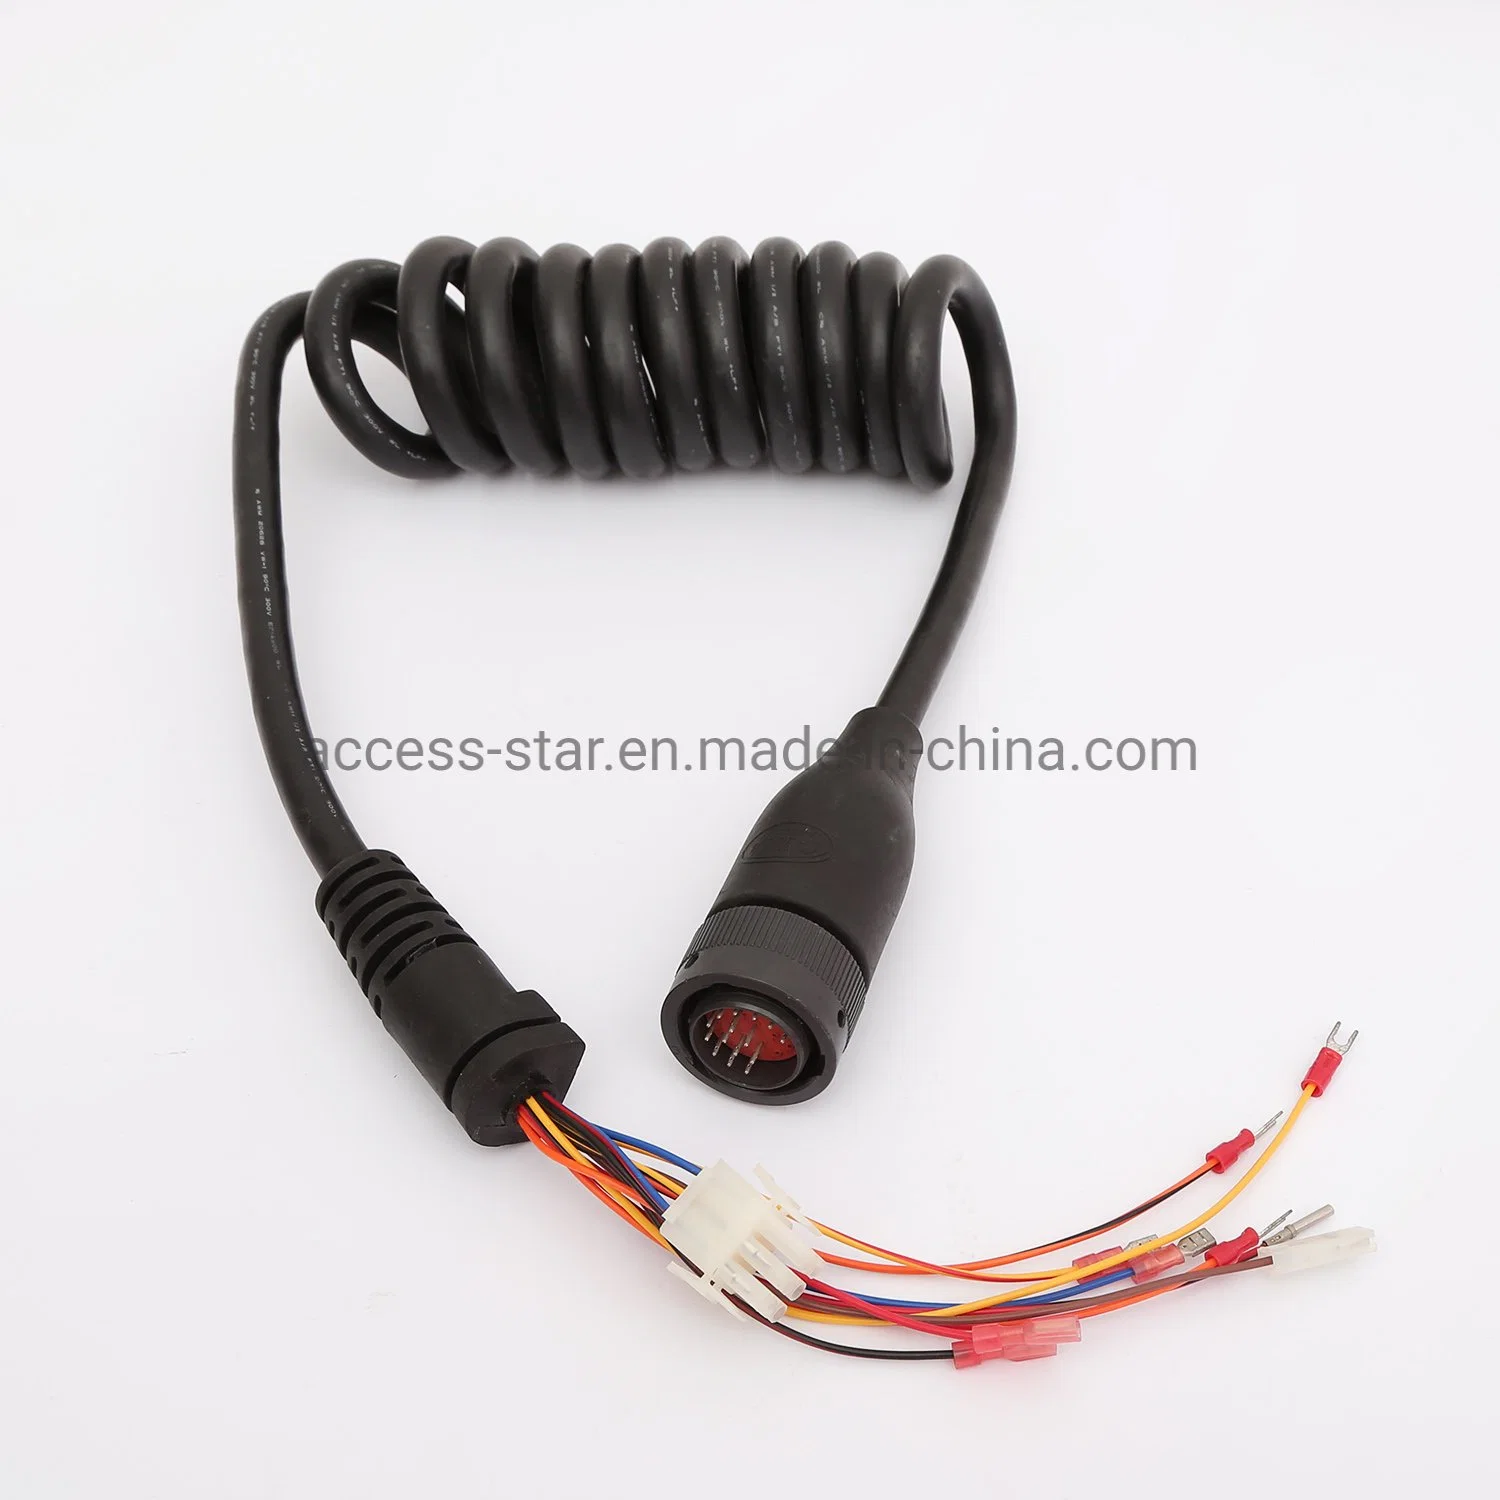 Multi Core Copper Electric Wires Cables Electrical Cable with U Shaped Copper Tube Terminals Wire Assembly